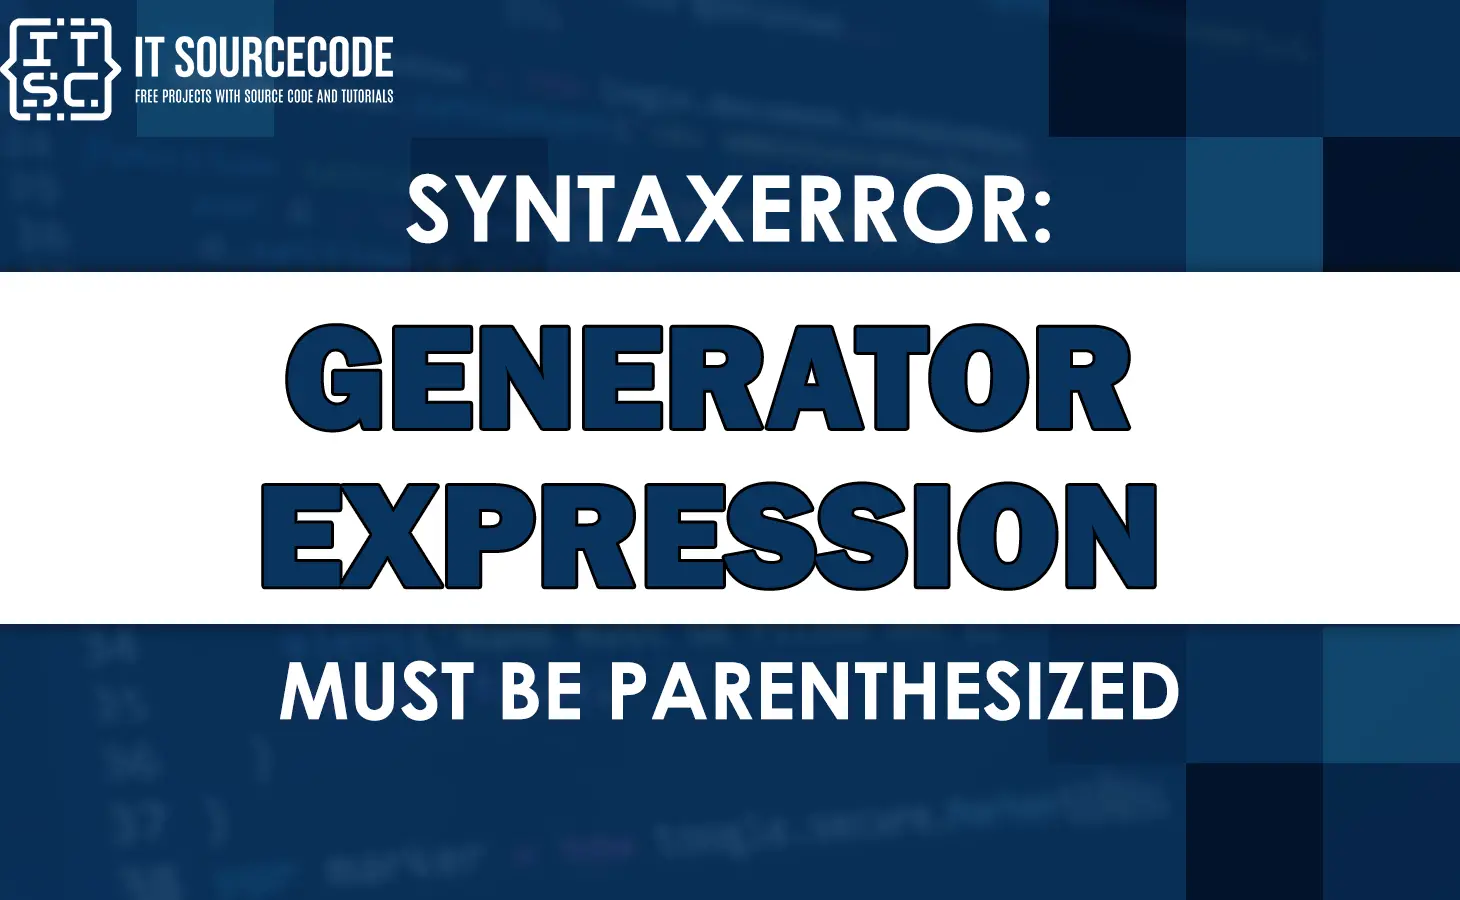 Syntaxerror generator expression must be parenthesized